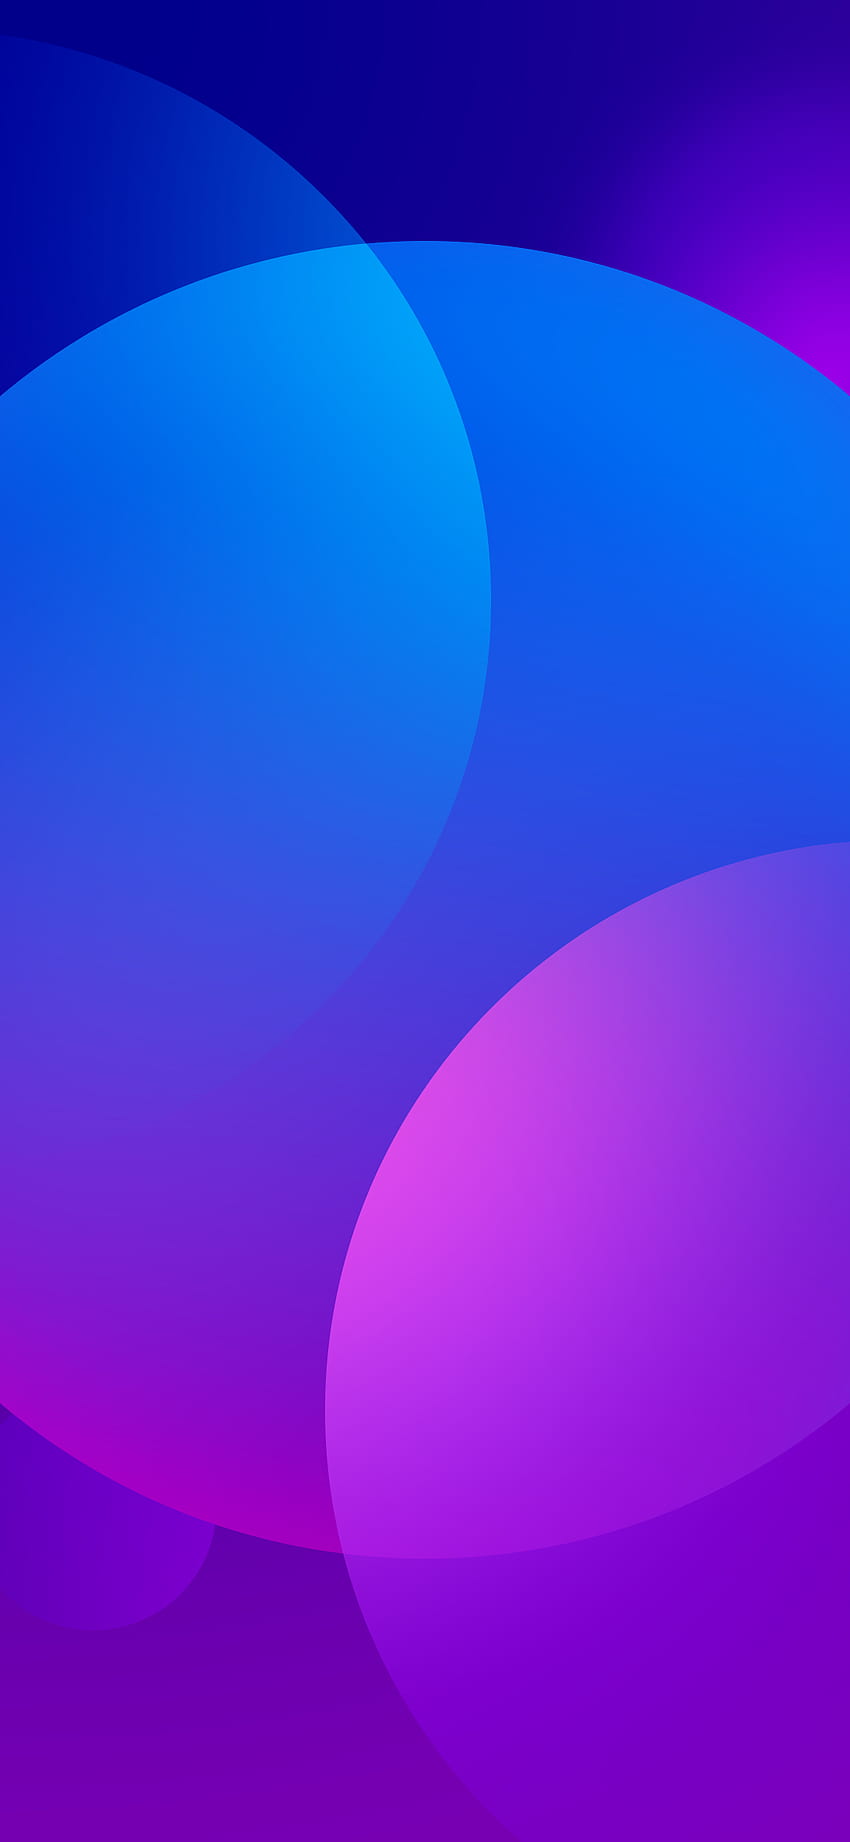 Oppo F11 Pro (YTECHB Exclusive) in 2020. Samsung , Abstract background, phone HD phone wallpaper